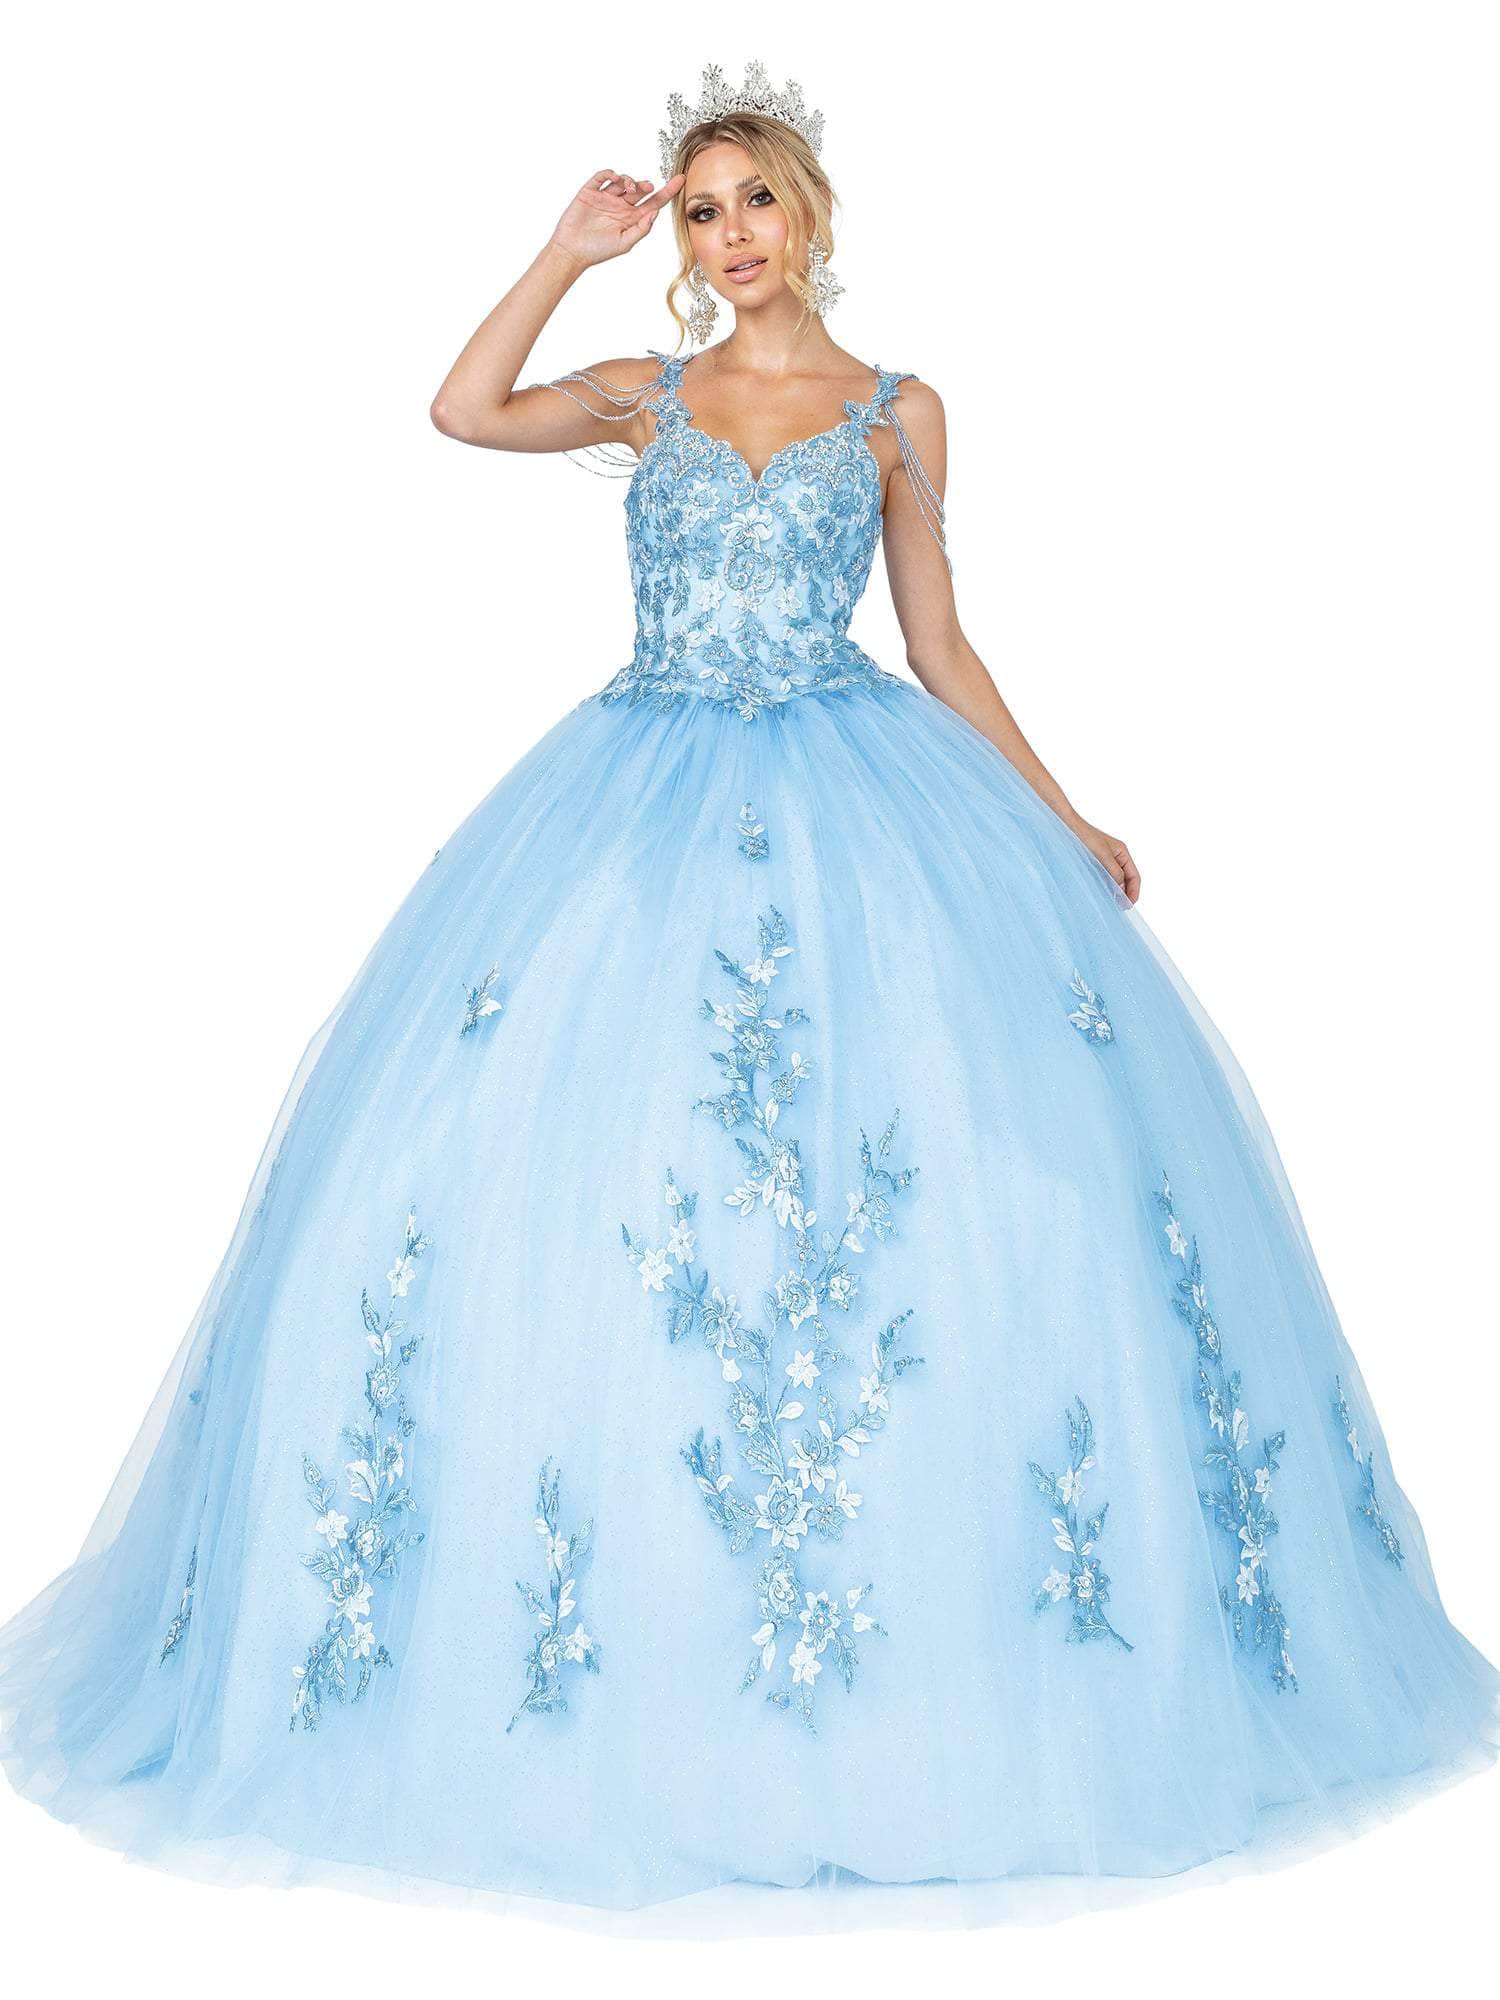 Image of Dancing Queen - 1546 Bead-Garlanded Embroidered Bodice Ballgown